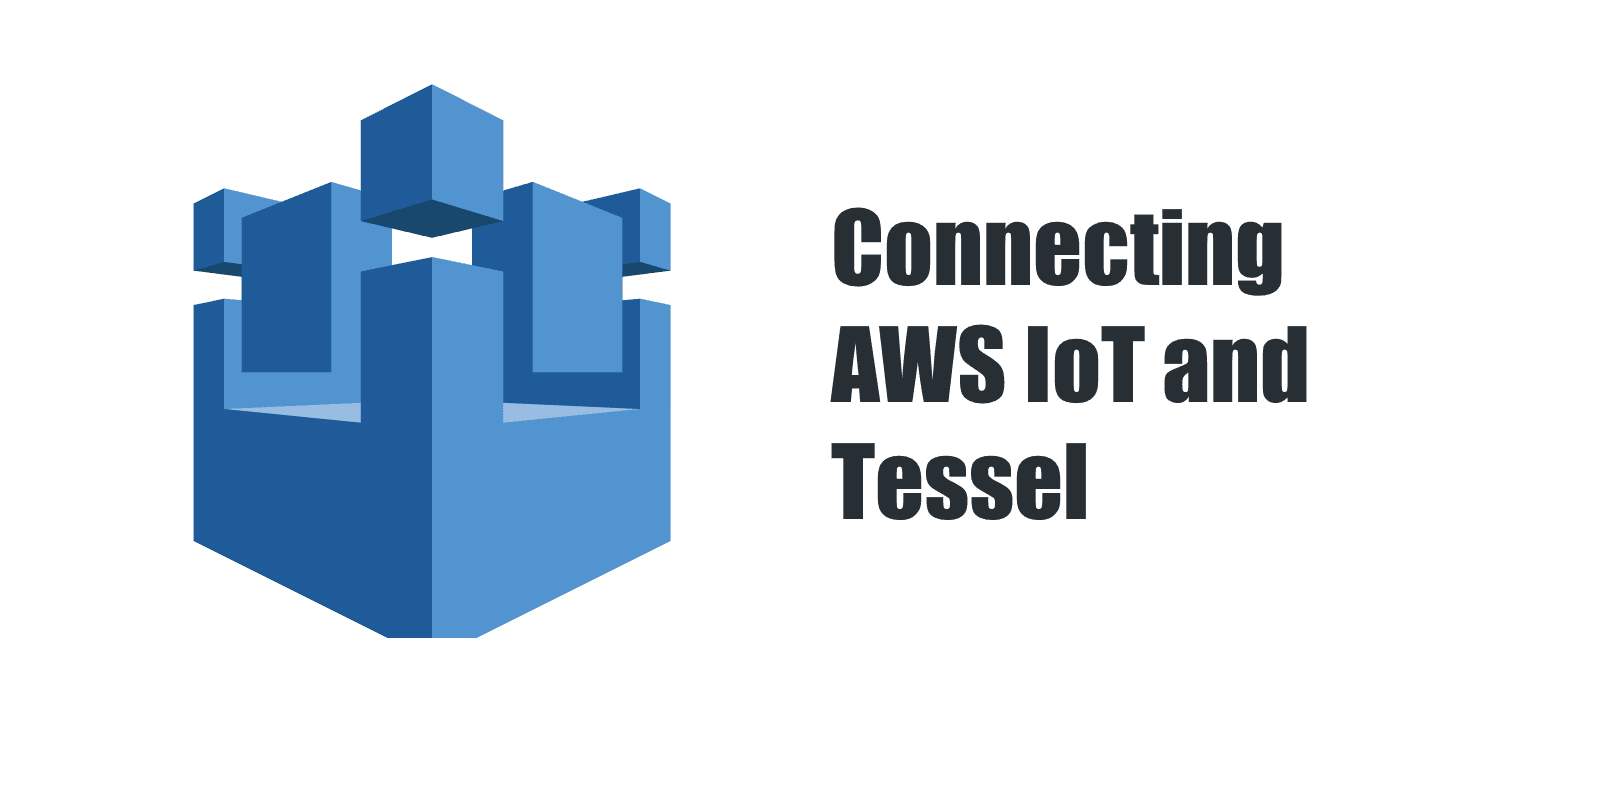 Getting started with AWS IoT and Tessel